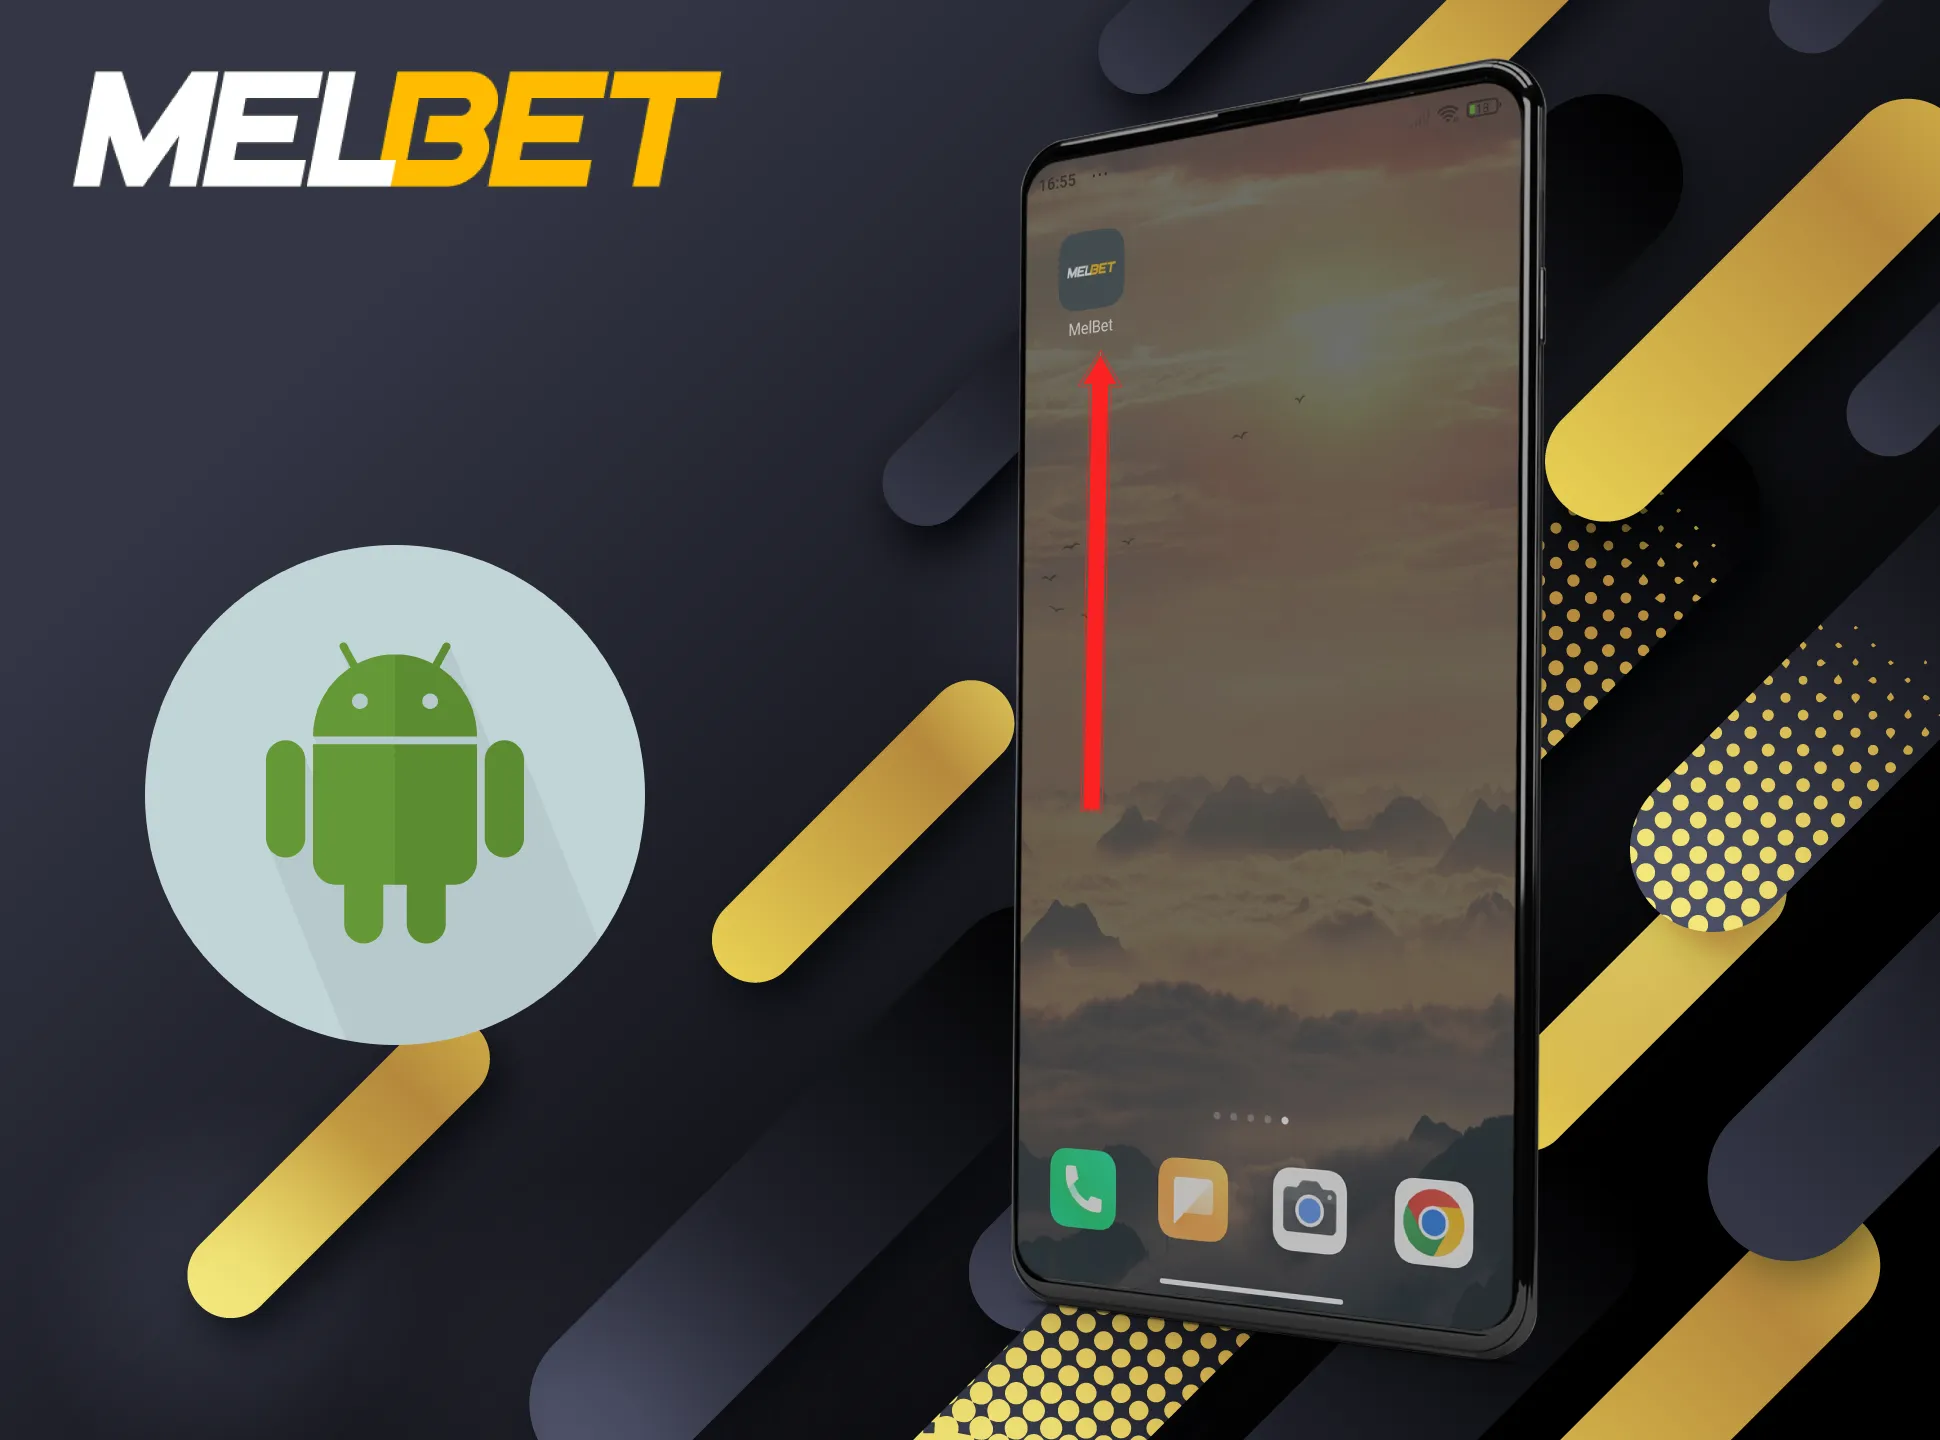 You can place a Melbet app on the main screen of your smartphone.